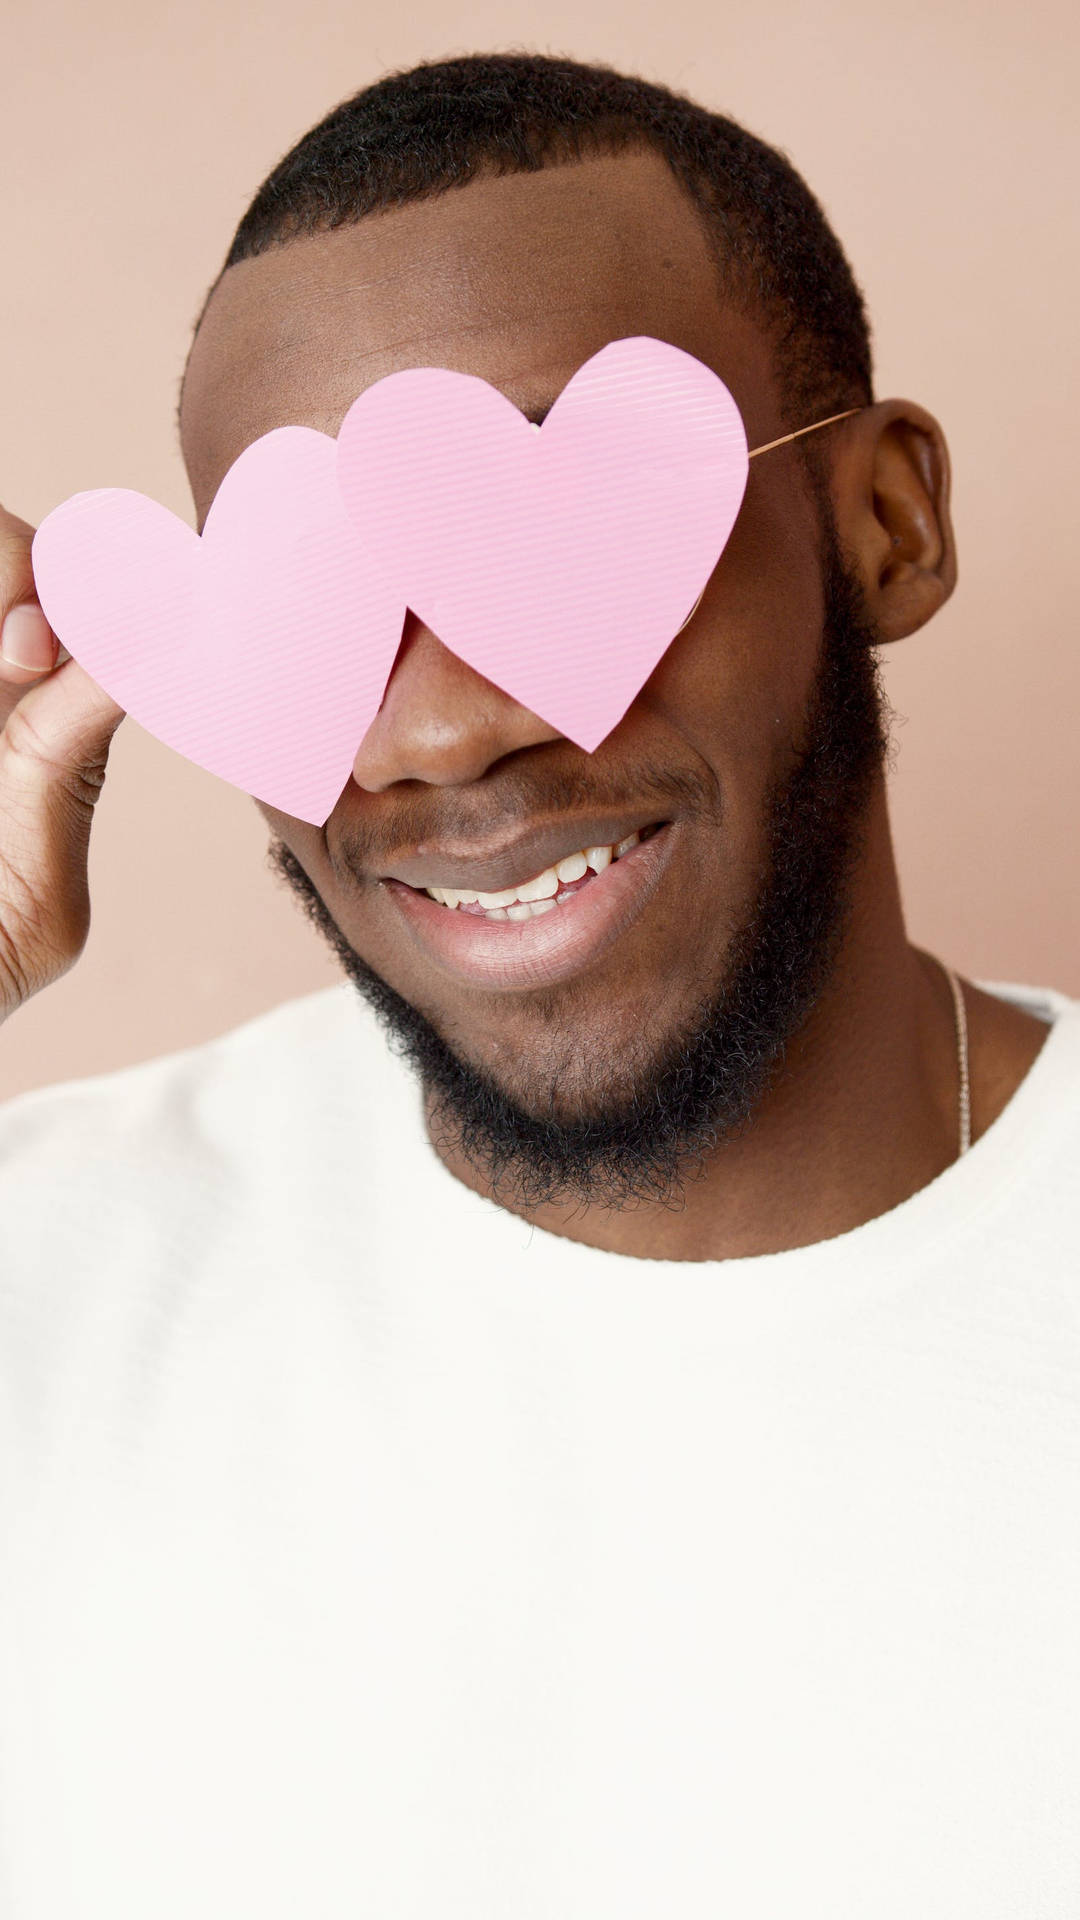 Man Smiling With Pastel Pink Heart Wallpaper